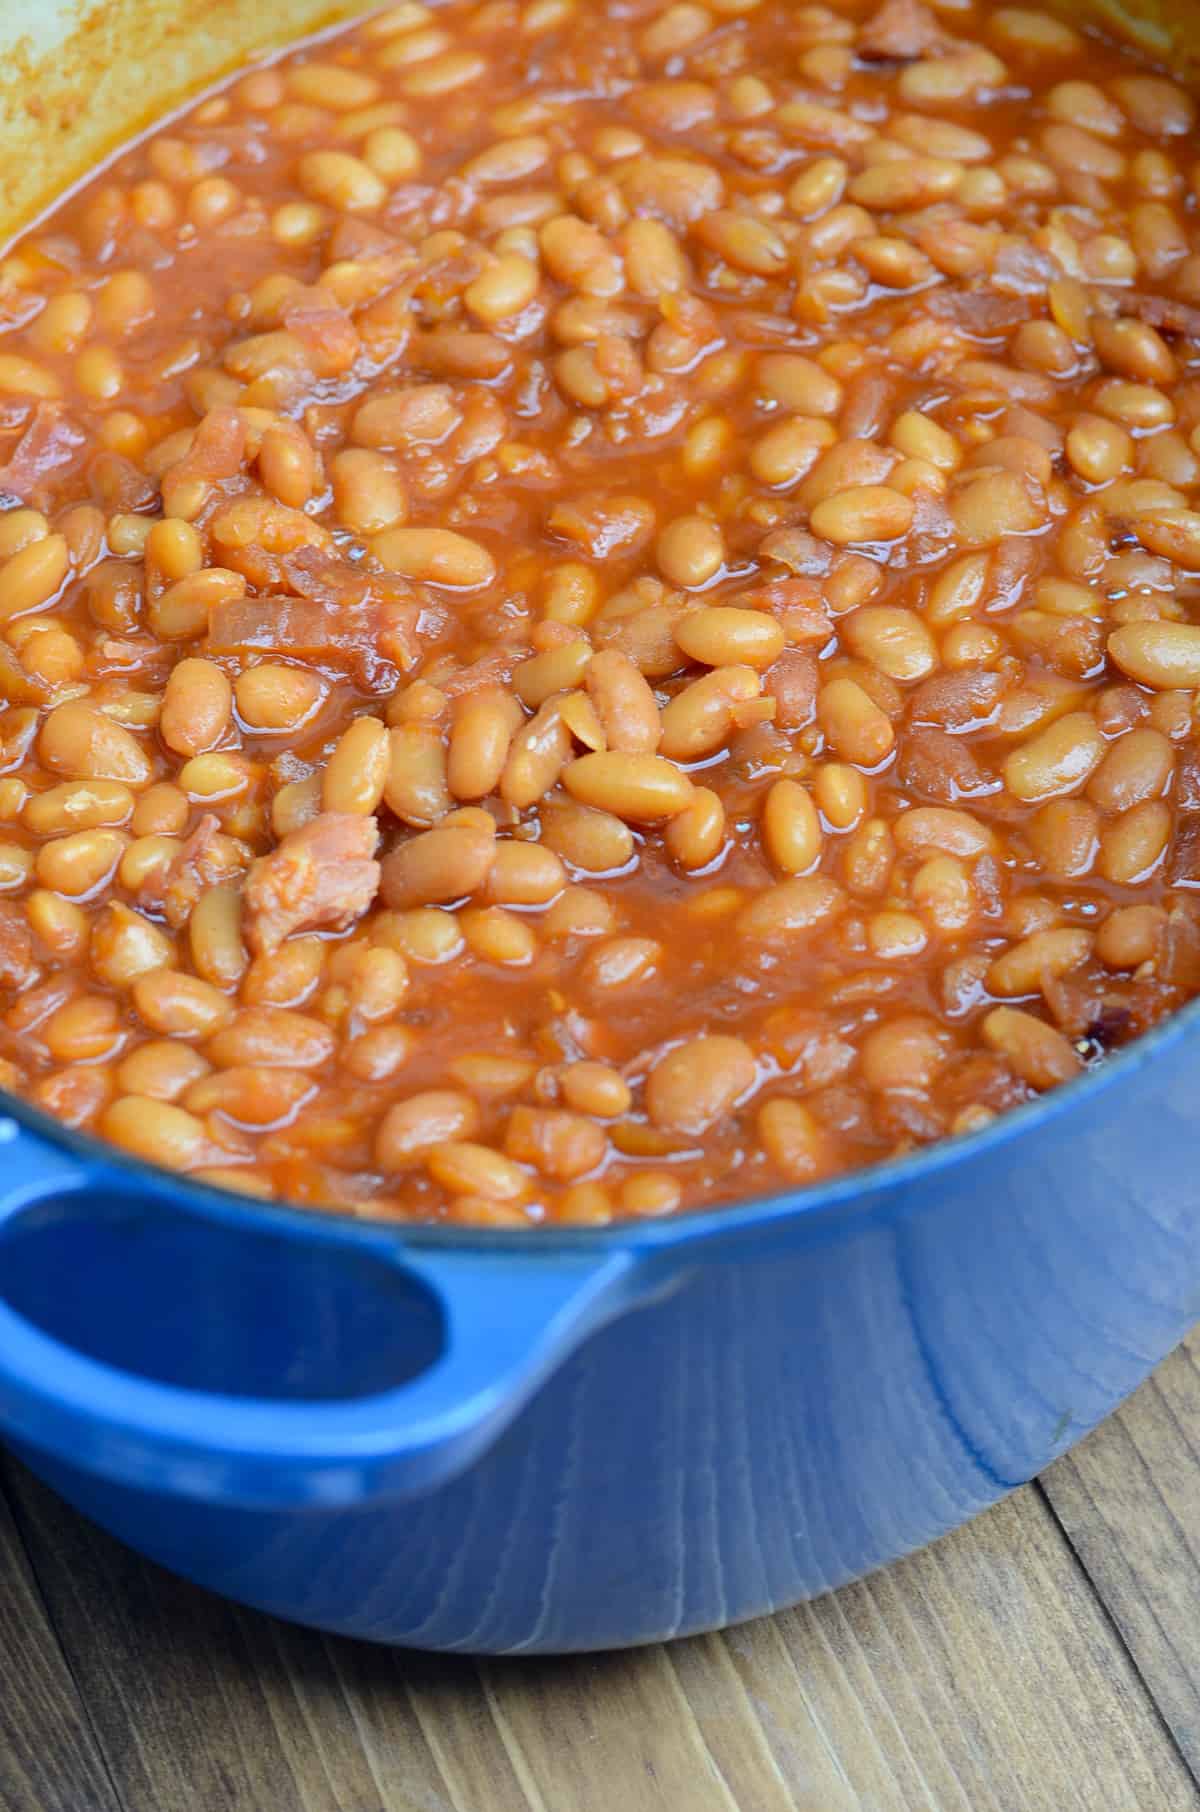 Baked beans in a blue pot on a wood board.